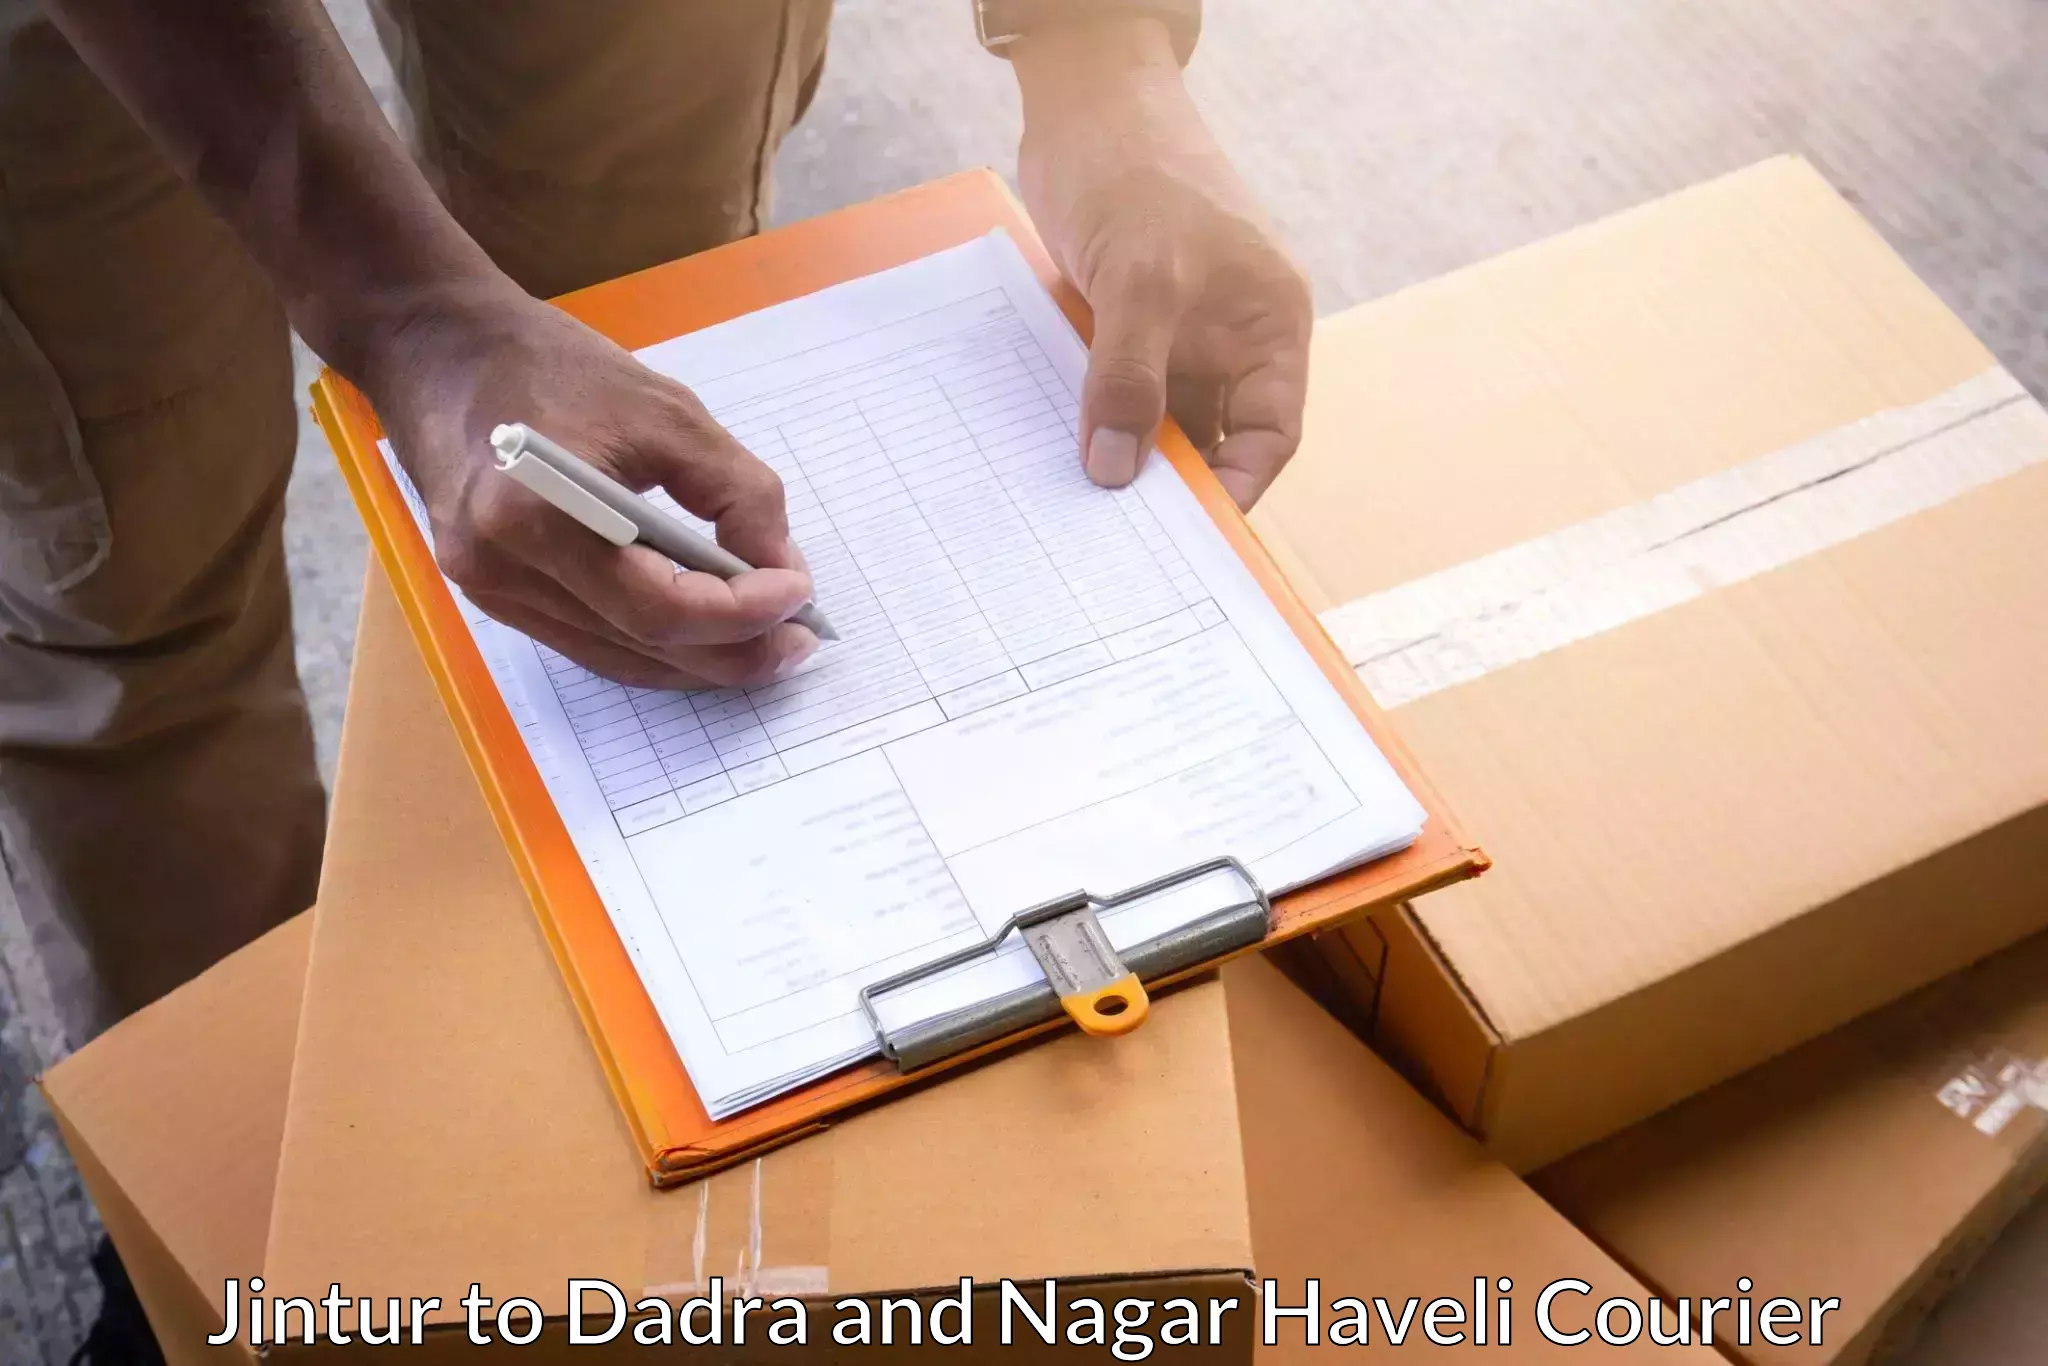 Expedited parcel delivery Jintur to Dadra and Nagar Haveli